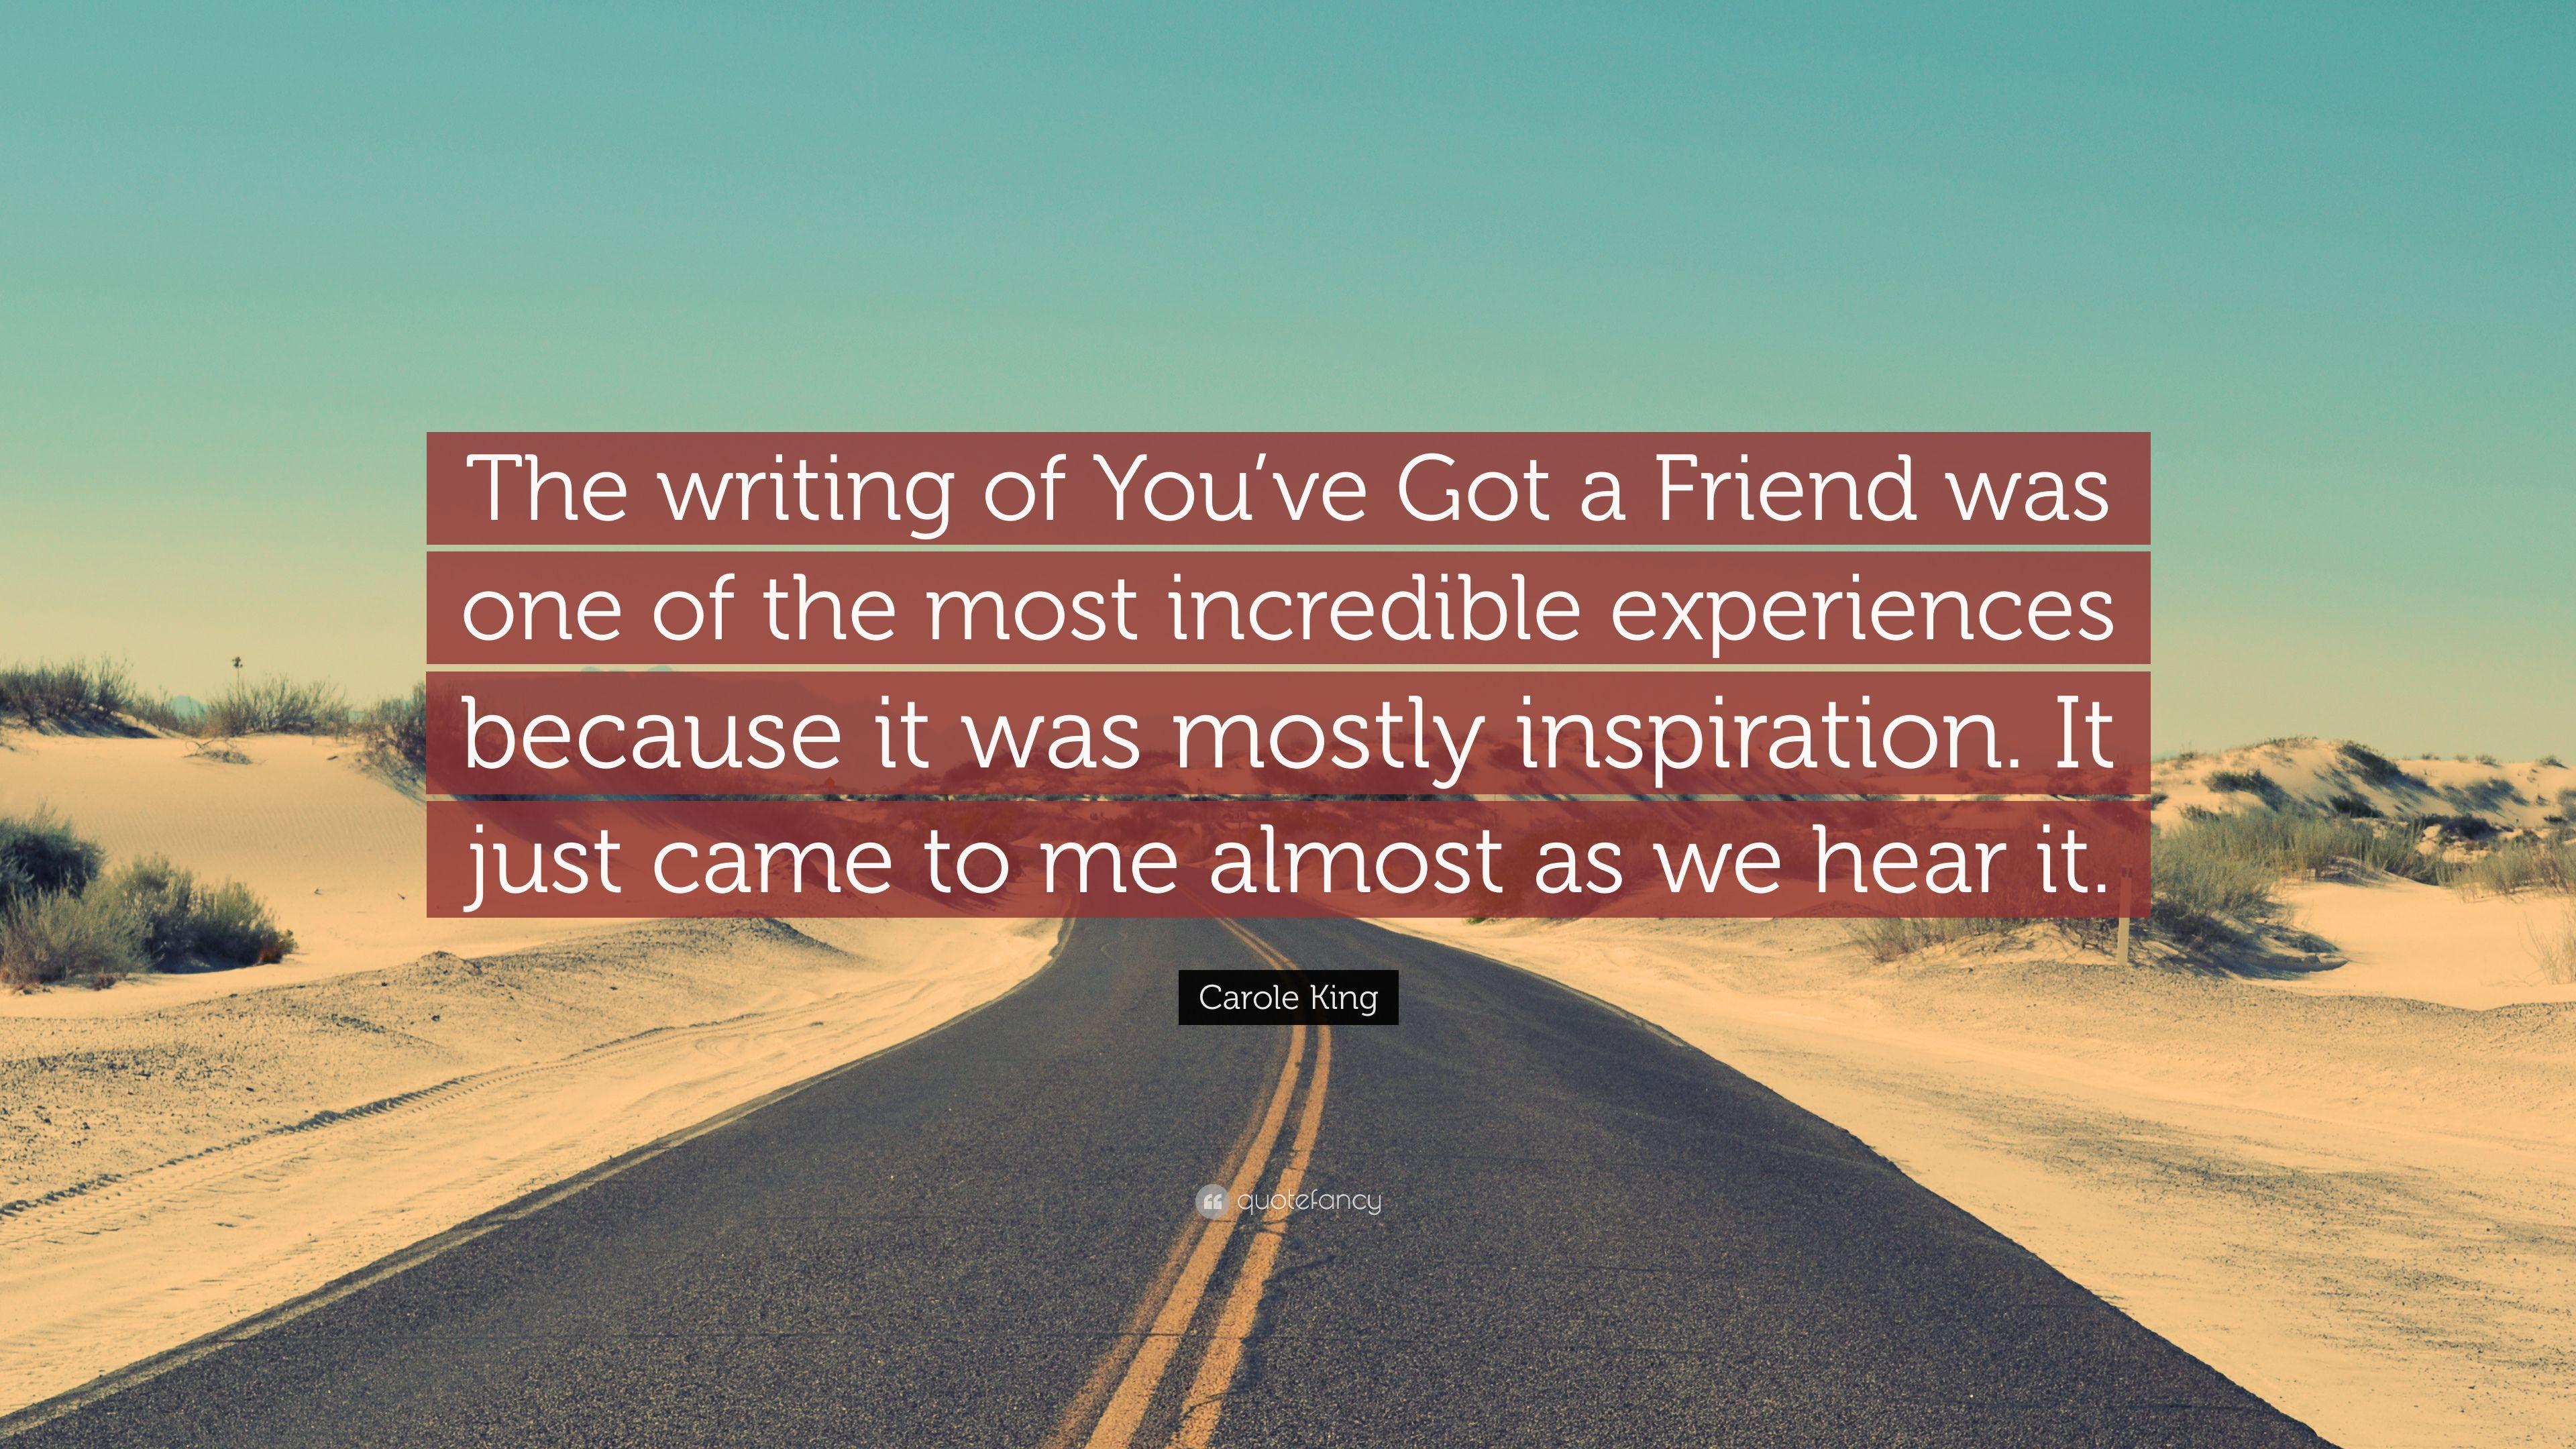 Carole King Quote: “The writing of You've Got a Friend was one